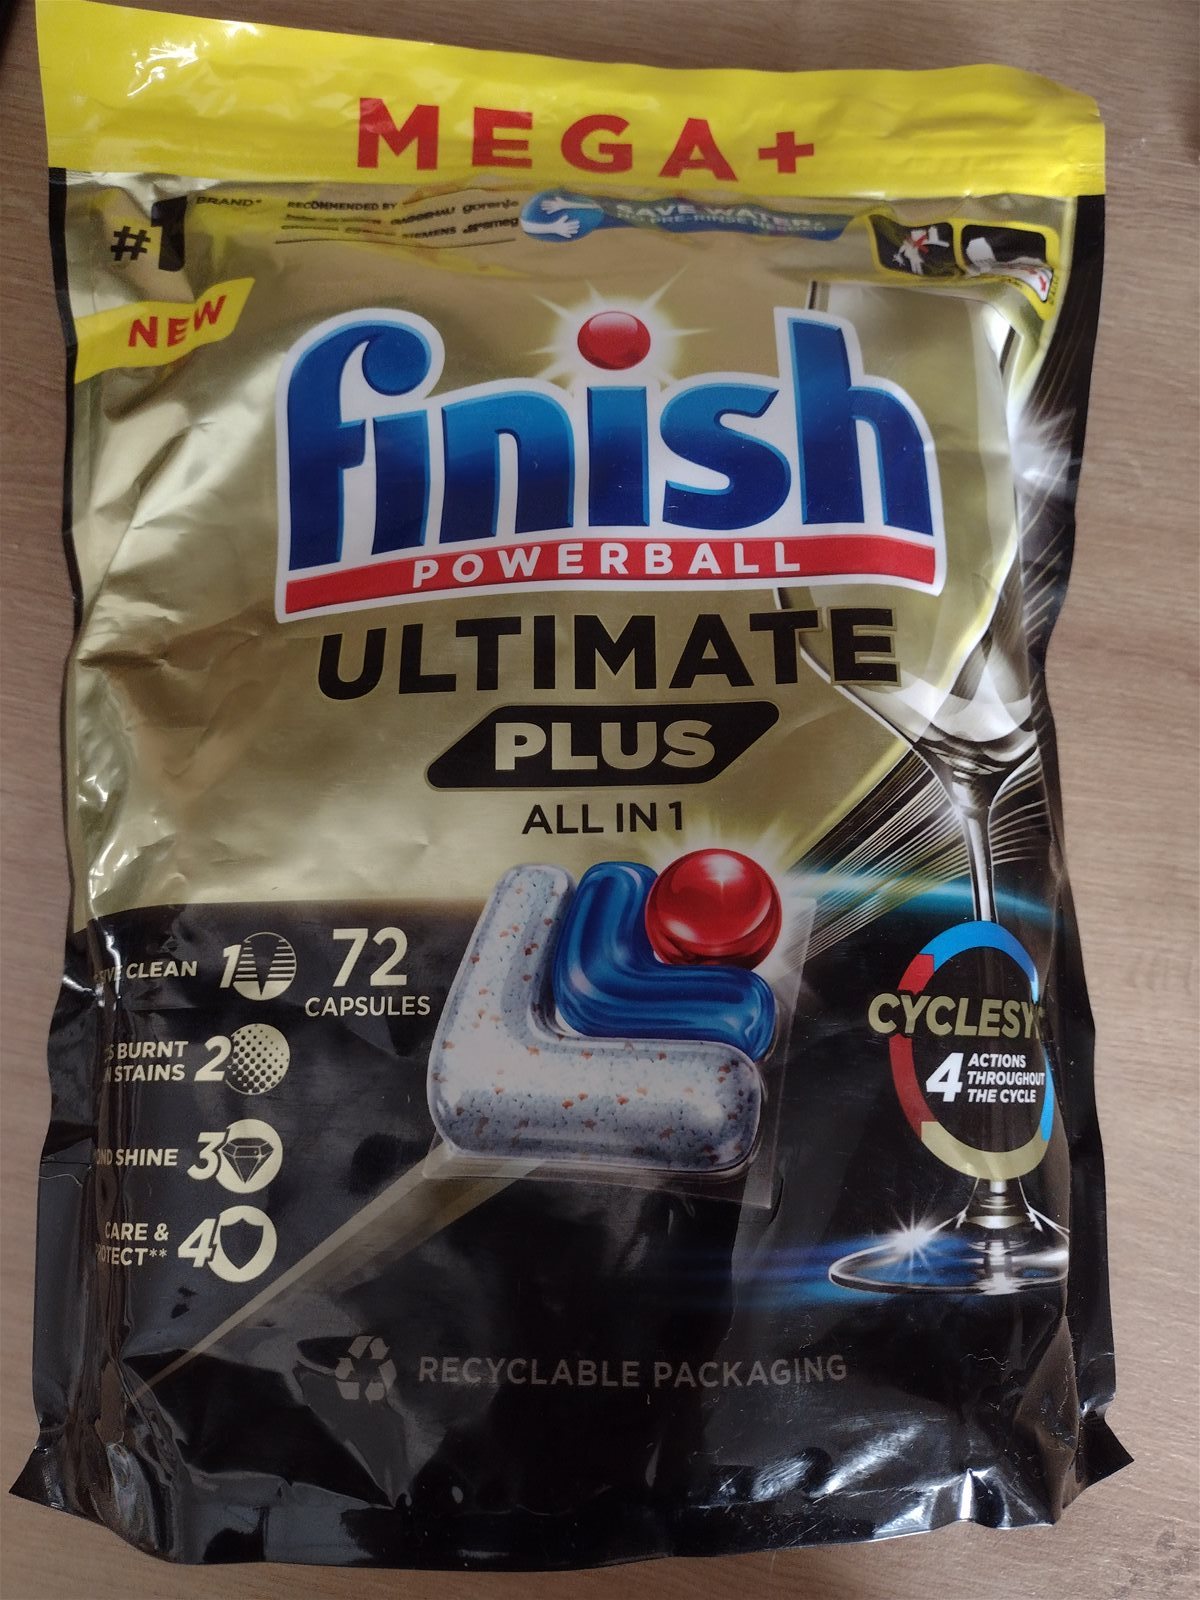 Reviews Finish Ultimate Plus All in 1, 54 pcs